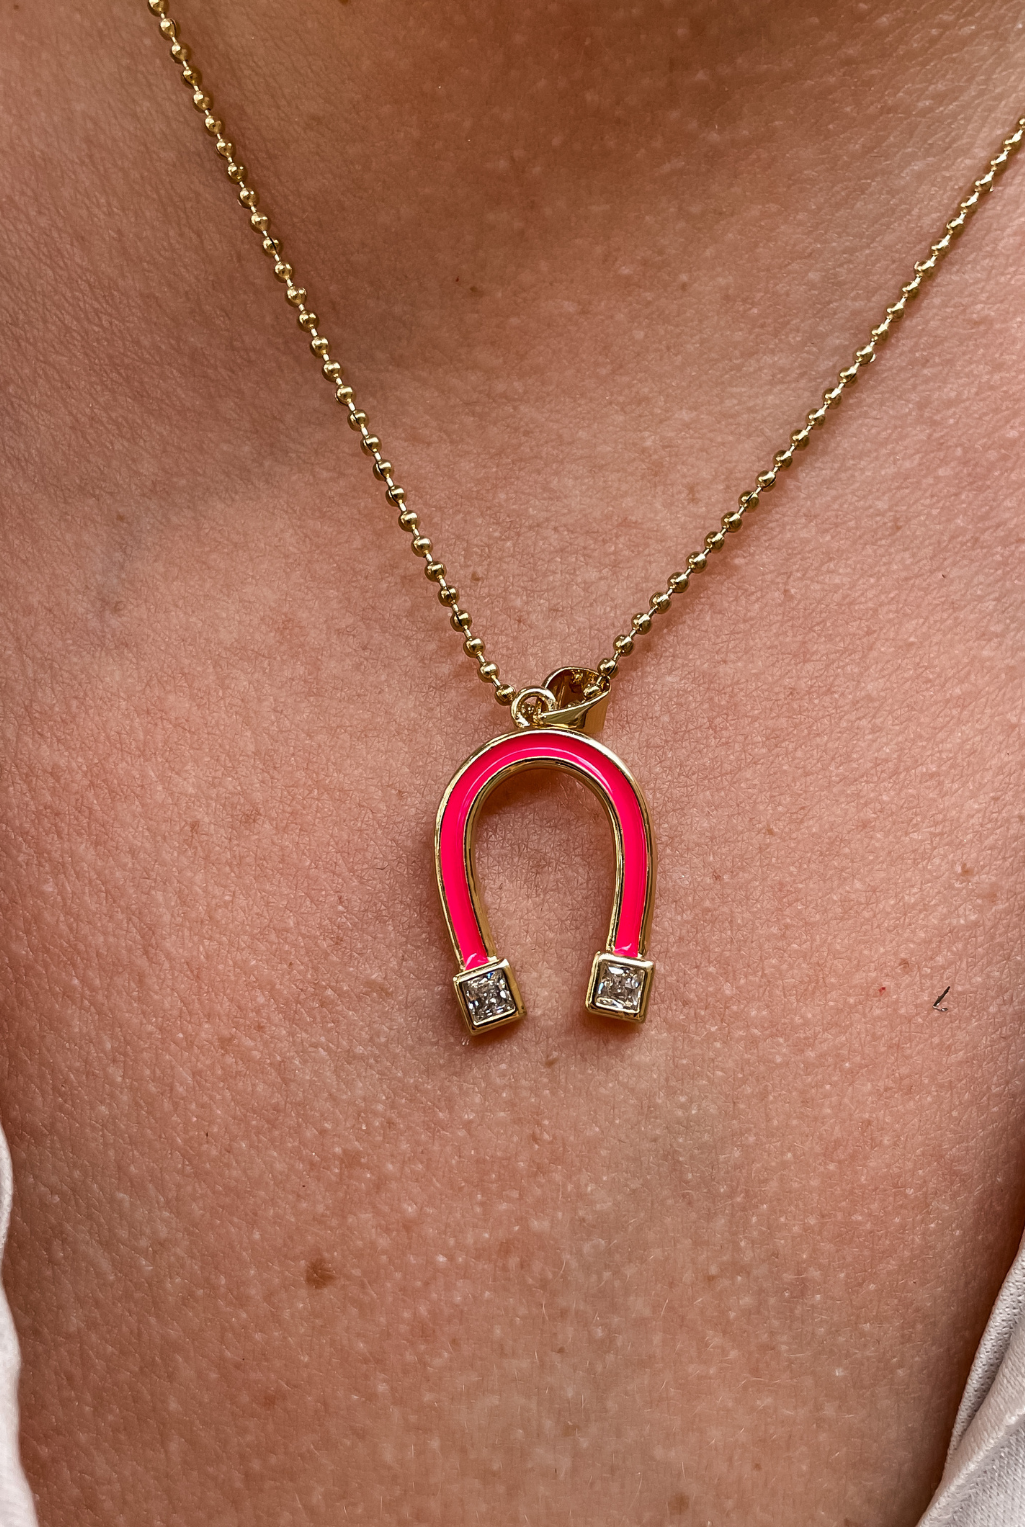 Just My Luck Necklace - Fuchsia